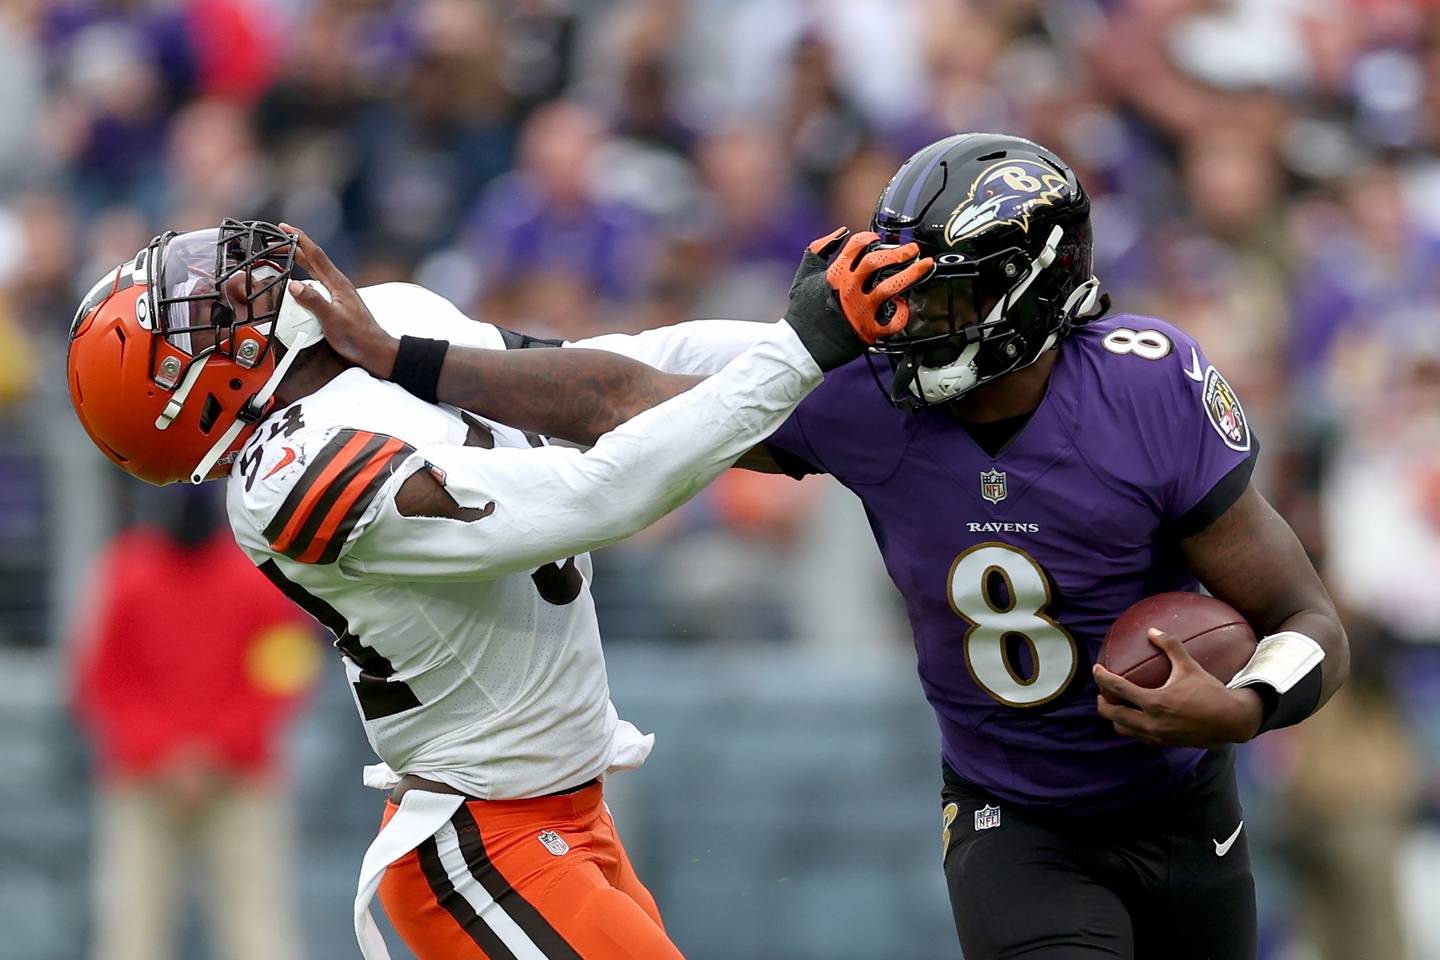 BALTIMORE, MARYLAND - OCTOBER 23: Quarterback Lamar Jackson #8 of the Baltimore Ravens stiff arms linebacker Deion Jones #54 of the Cleveland Browns in the second half at M&T Bank Stadium on October 23, 2022 in Baltimore, Maryland.